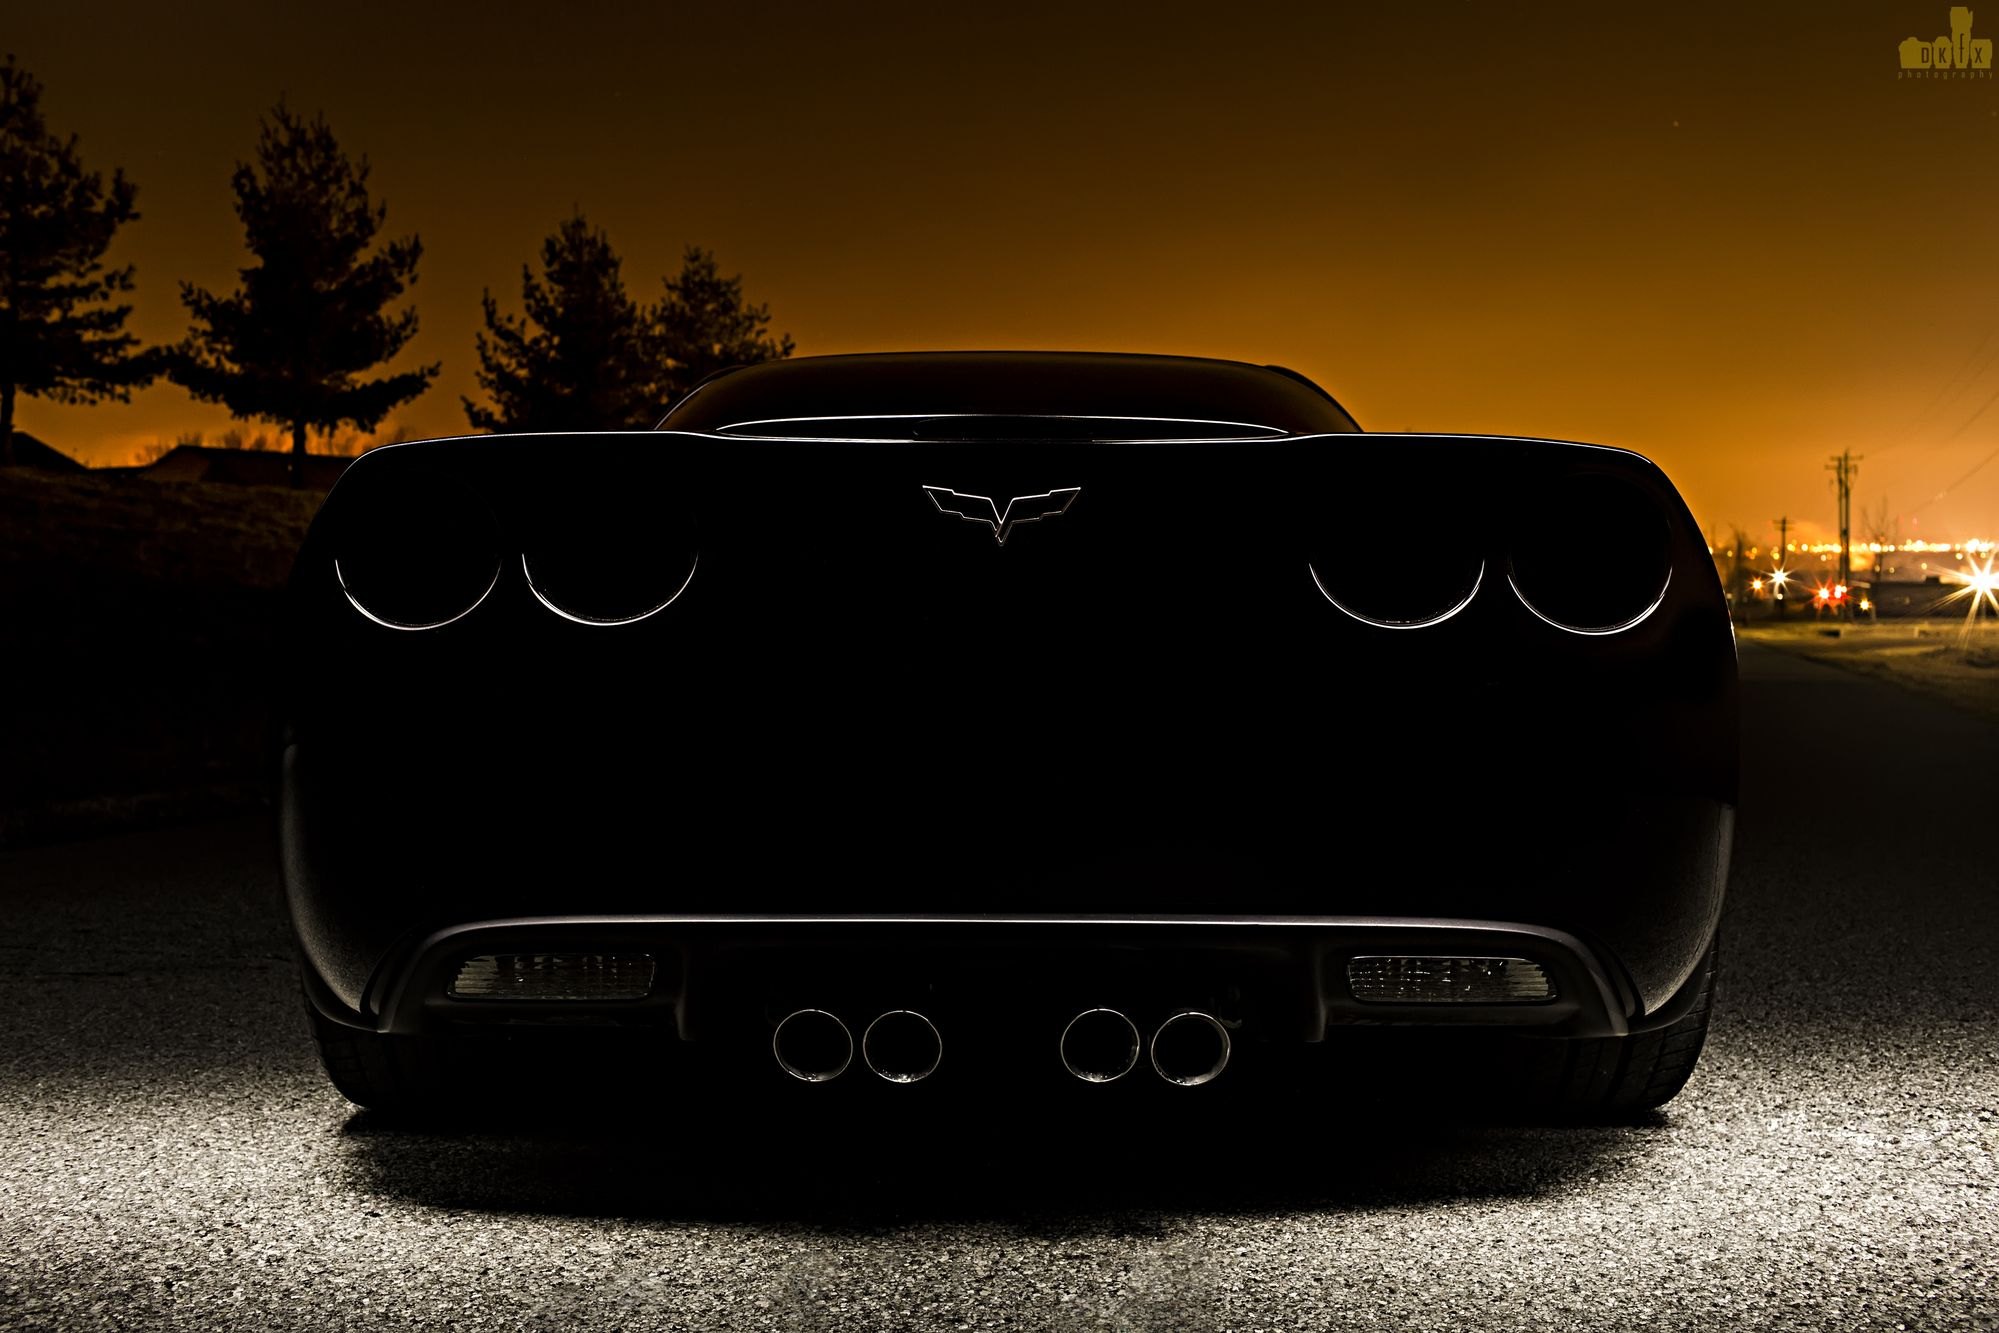 Aftermarket Rear Diffuser on Black Chevy Corvette - Photo by dan kinzie